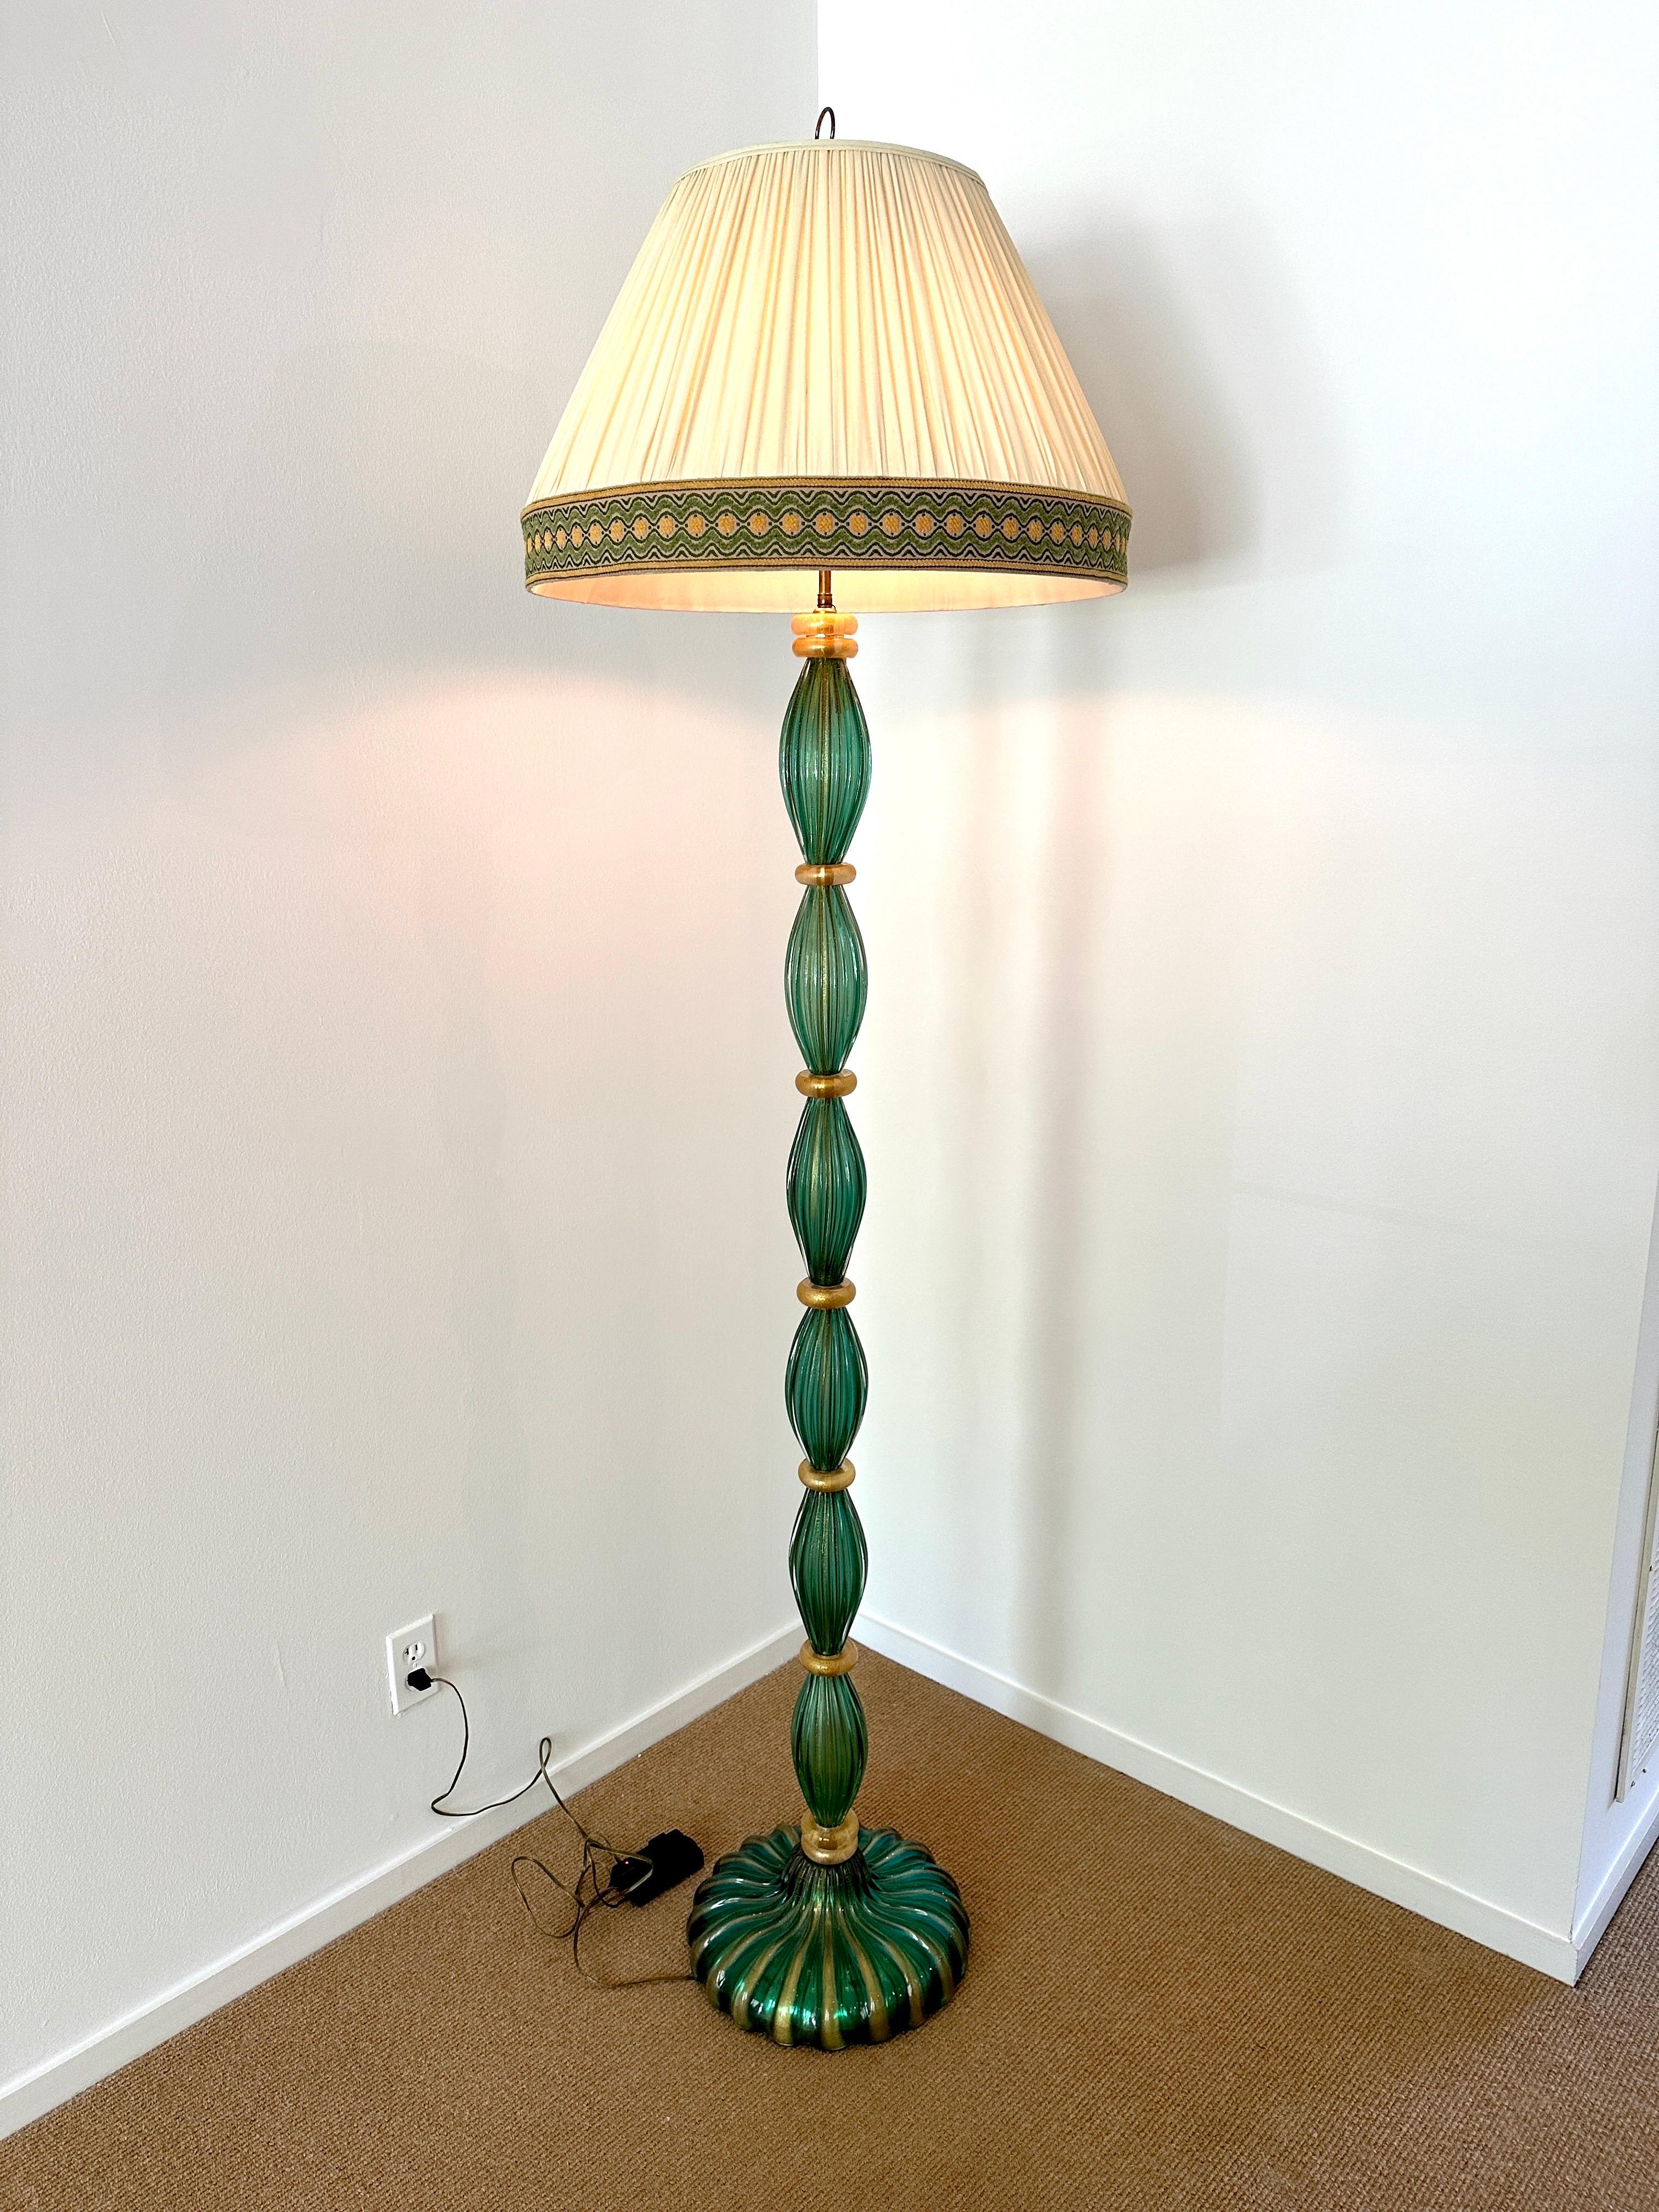 Italian Vintage Barovier Green Murano Glass Floor Lamp w/ Gold Foil Inclusions For Sale